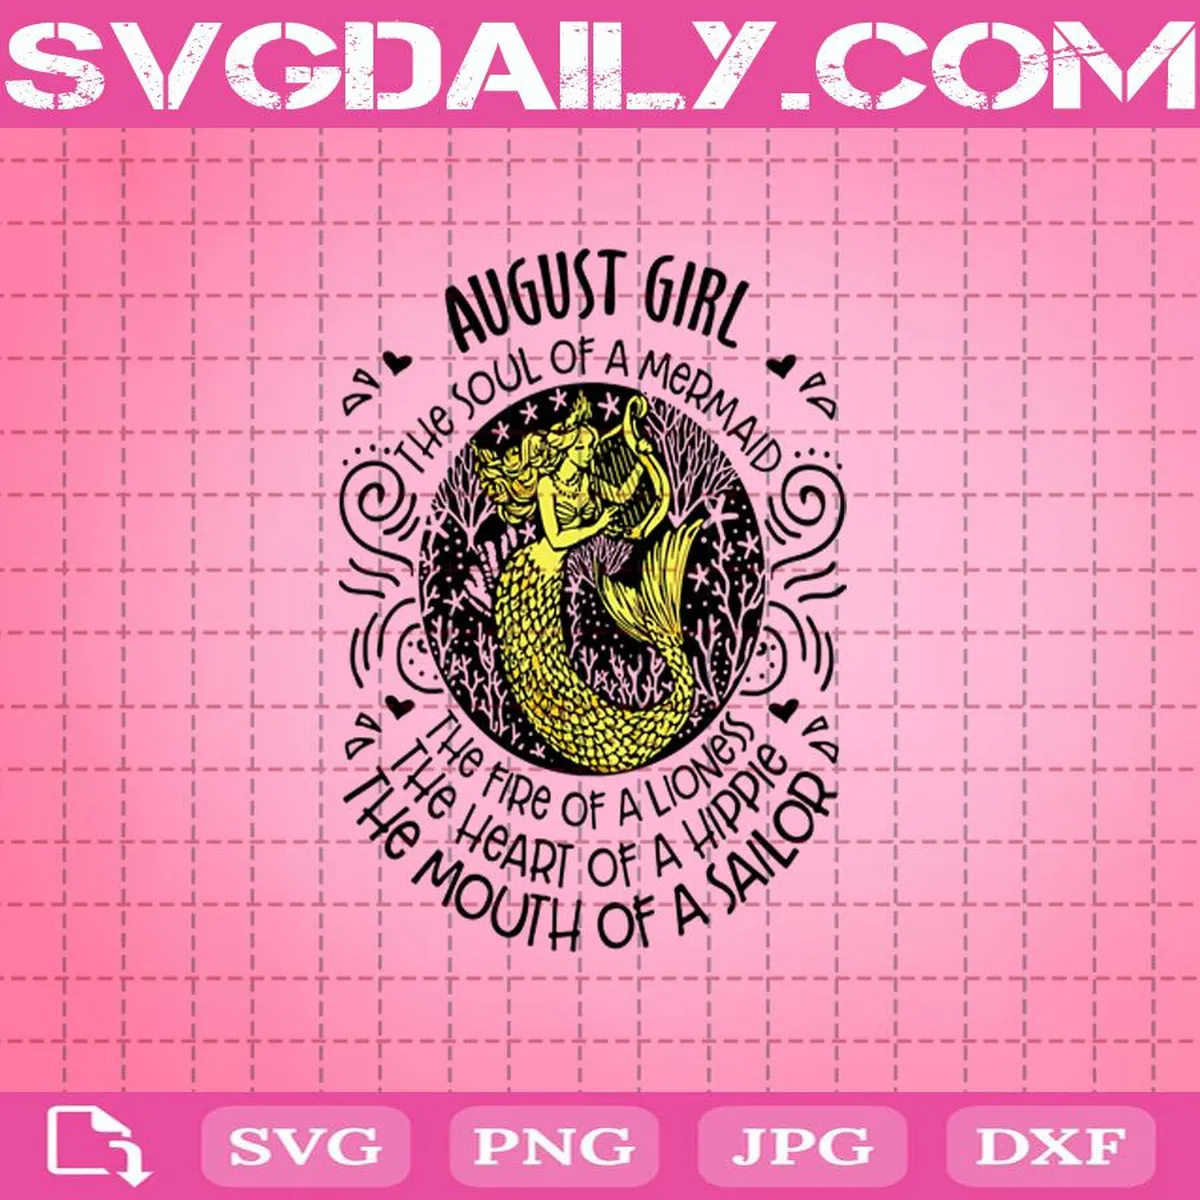 August Girl The Soul Of A Mermaid The Fire Of A Lioness Svg, August Girl Svg, A Lioness Svg, A Hippie Svg, A Sailor Svg